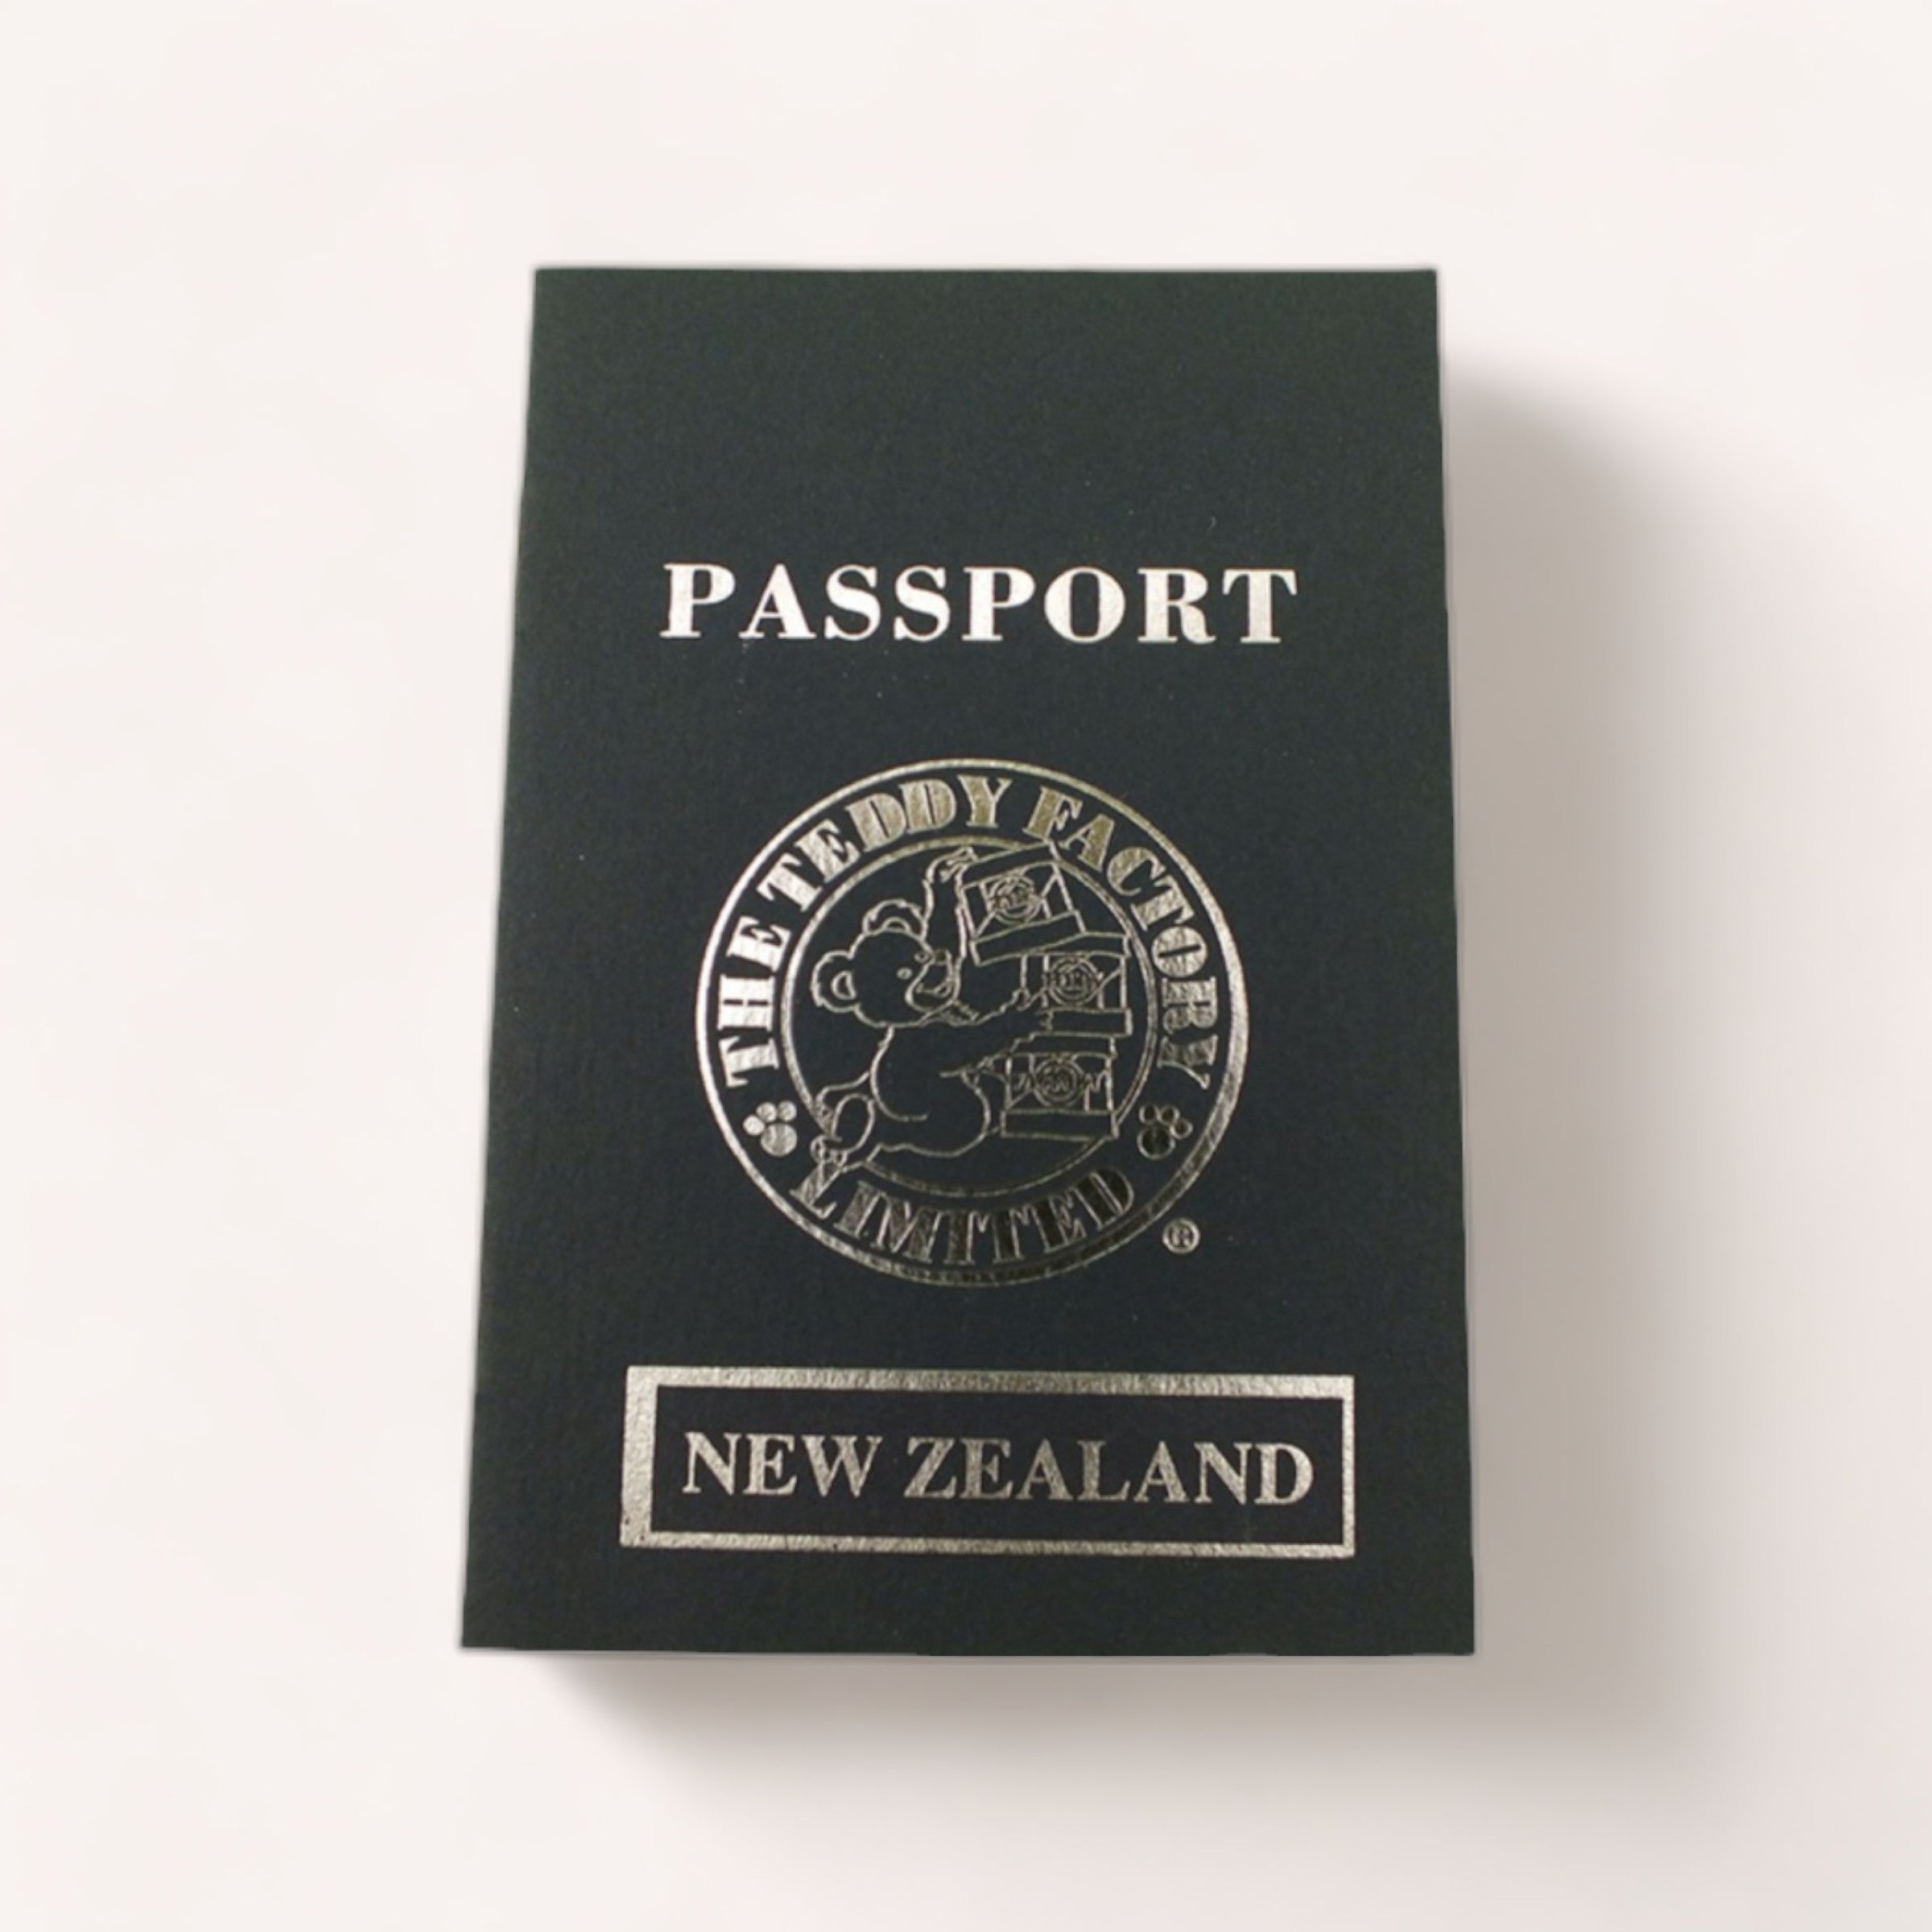 A Bear NZ Passport from The Teddy Factory adorned with travel stamps resting on a plain surface.